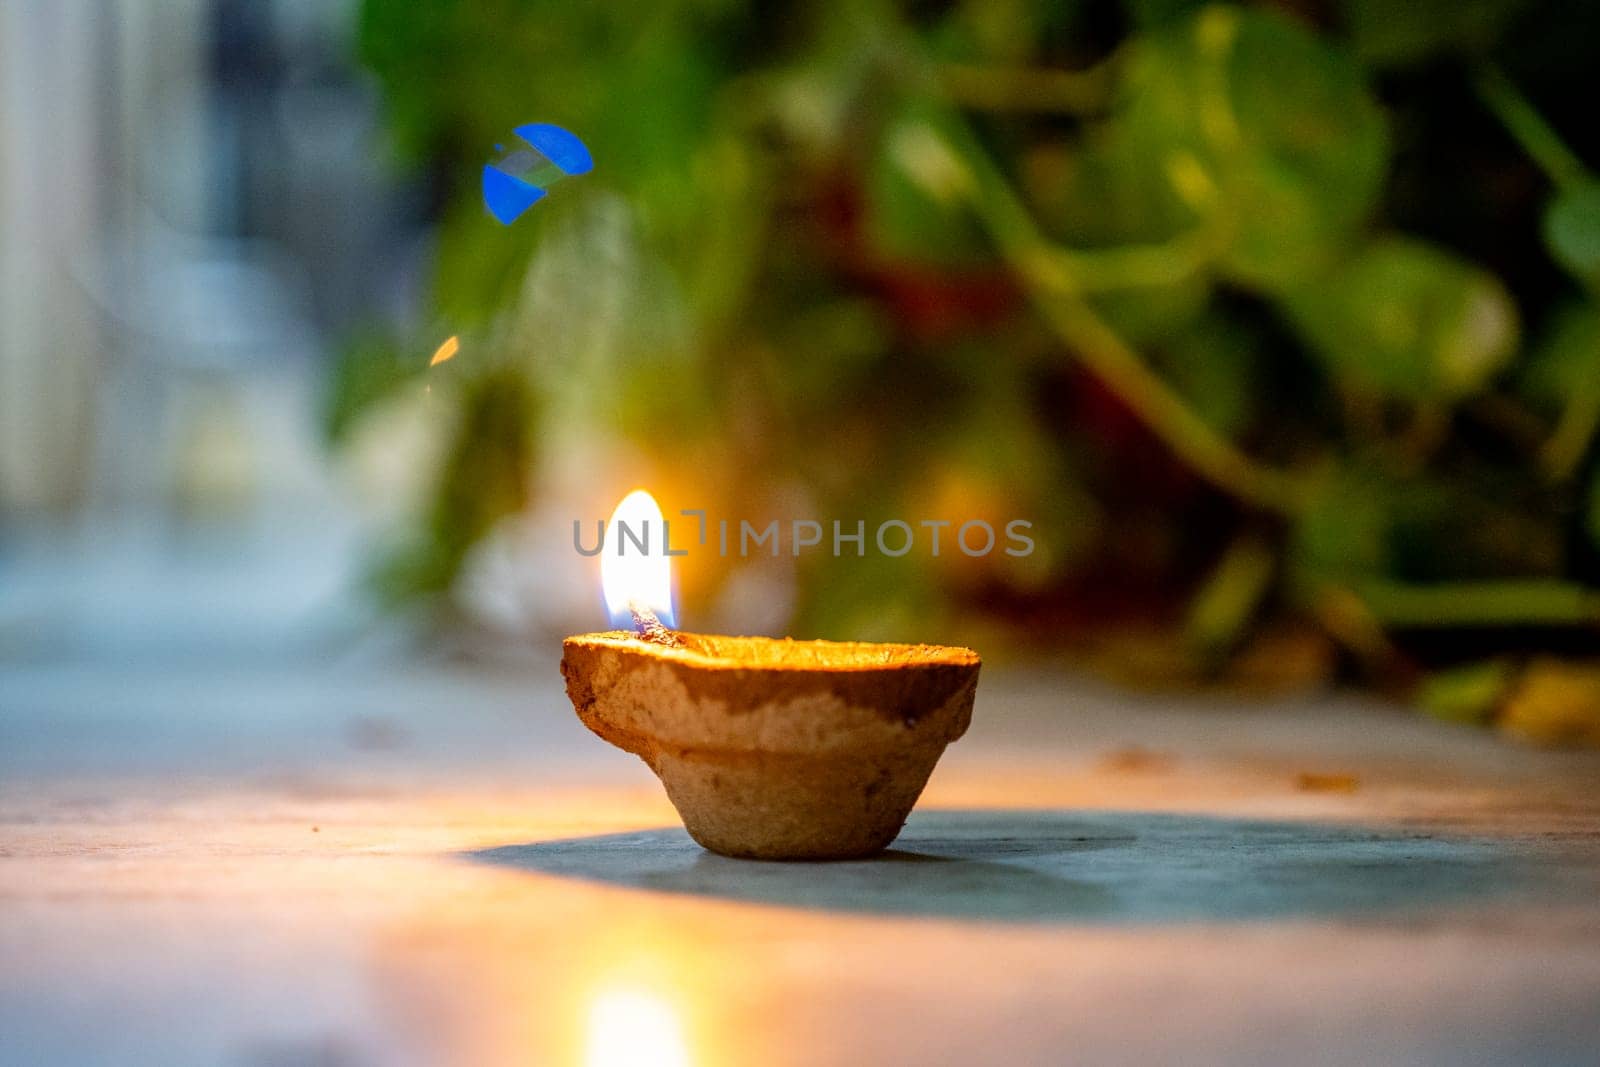 Organic diya lamp made of organic coconut fiber filled with oil and lit to provide light and as an offering to the hindu gods on the festival of diwali by Shalinimathur